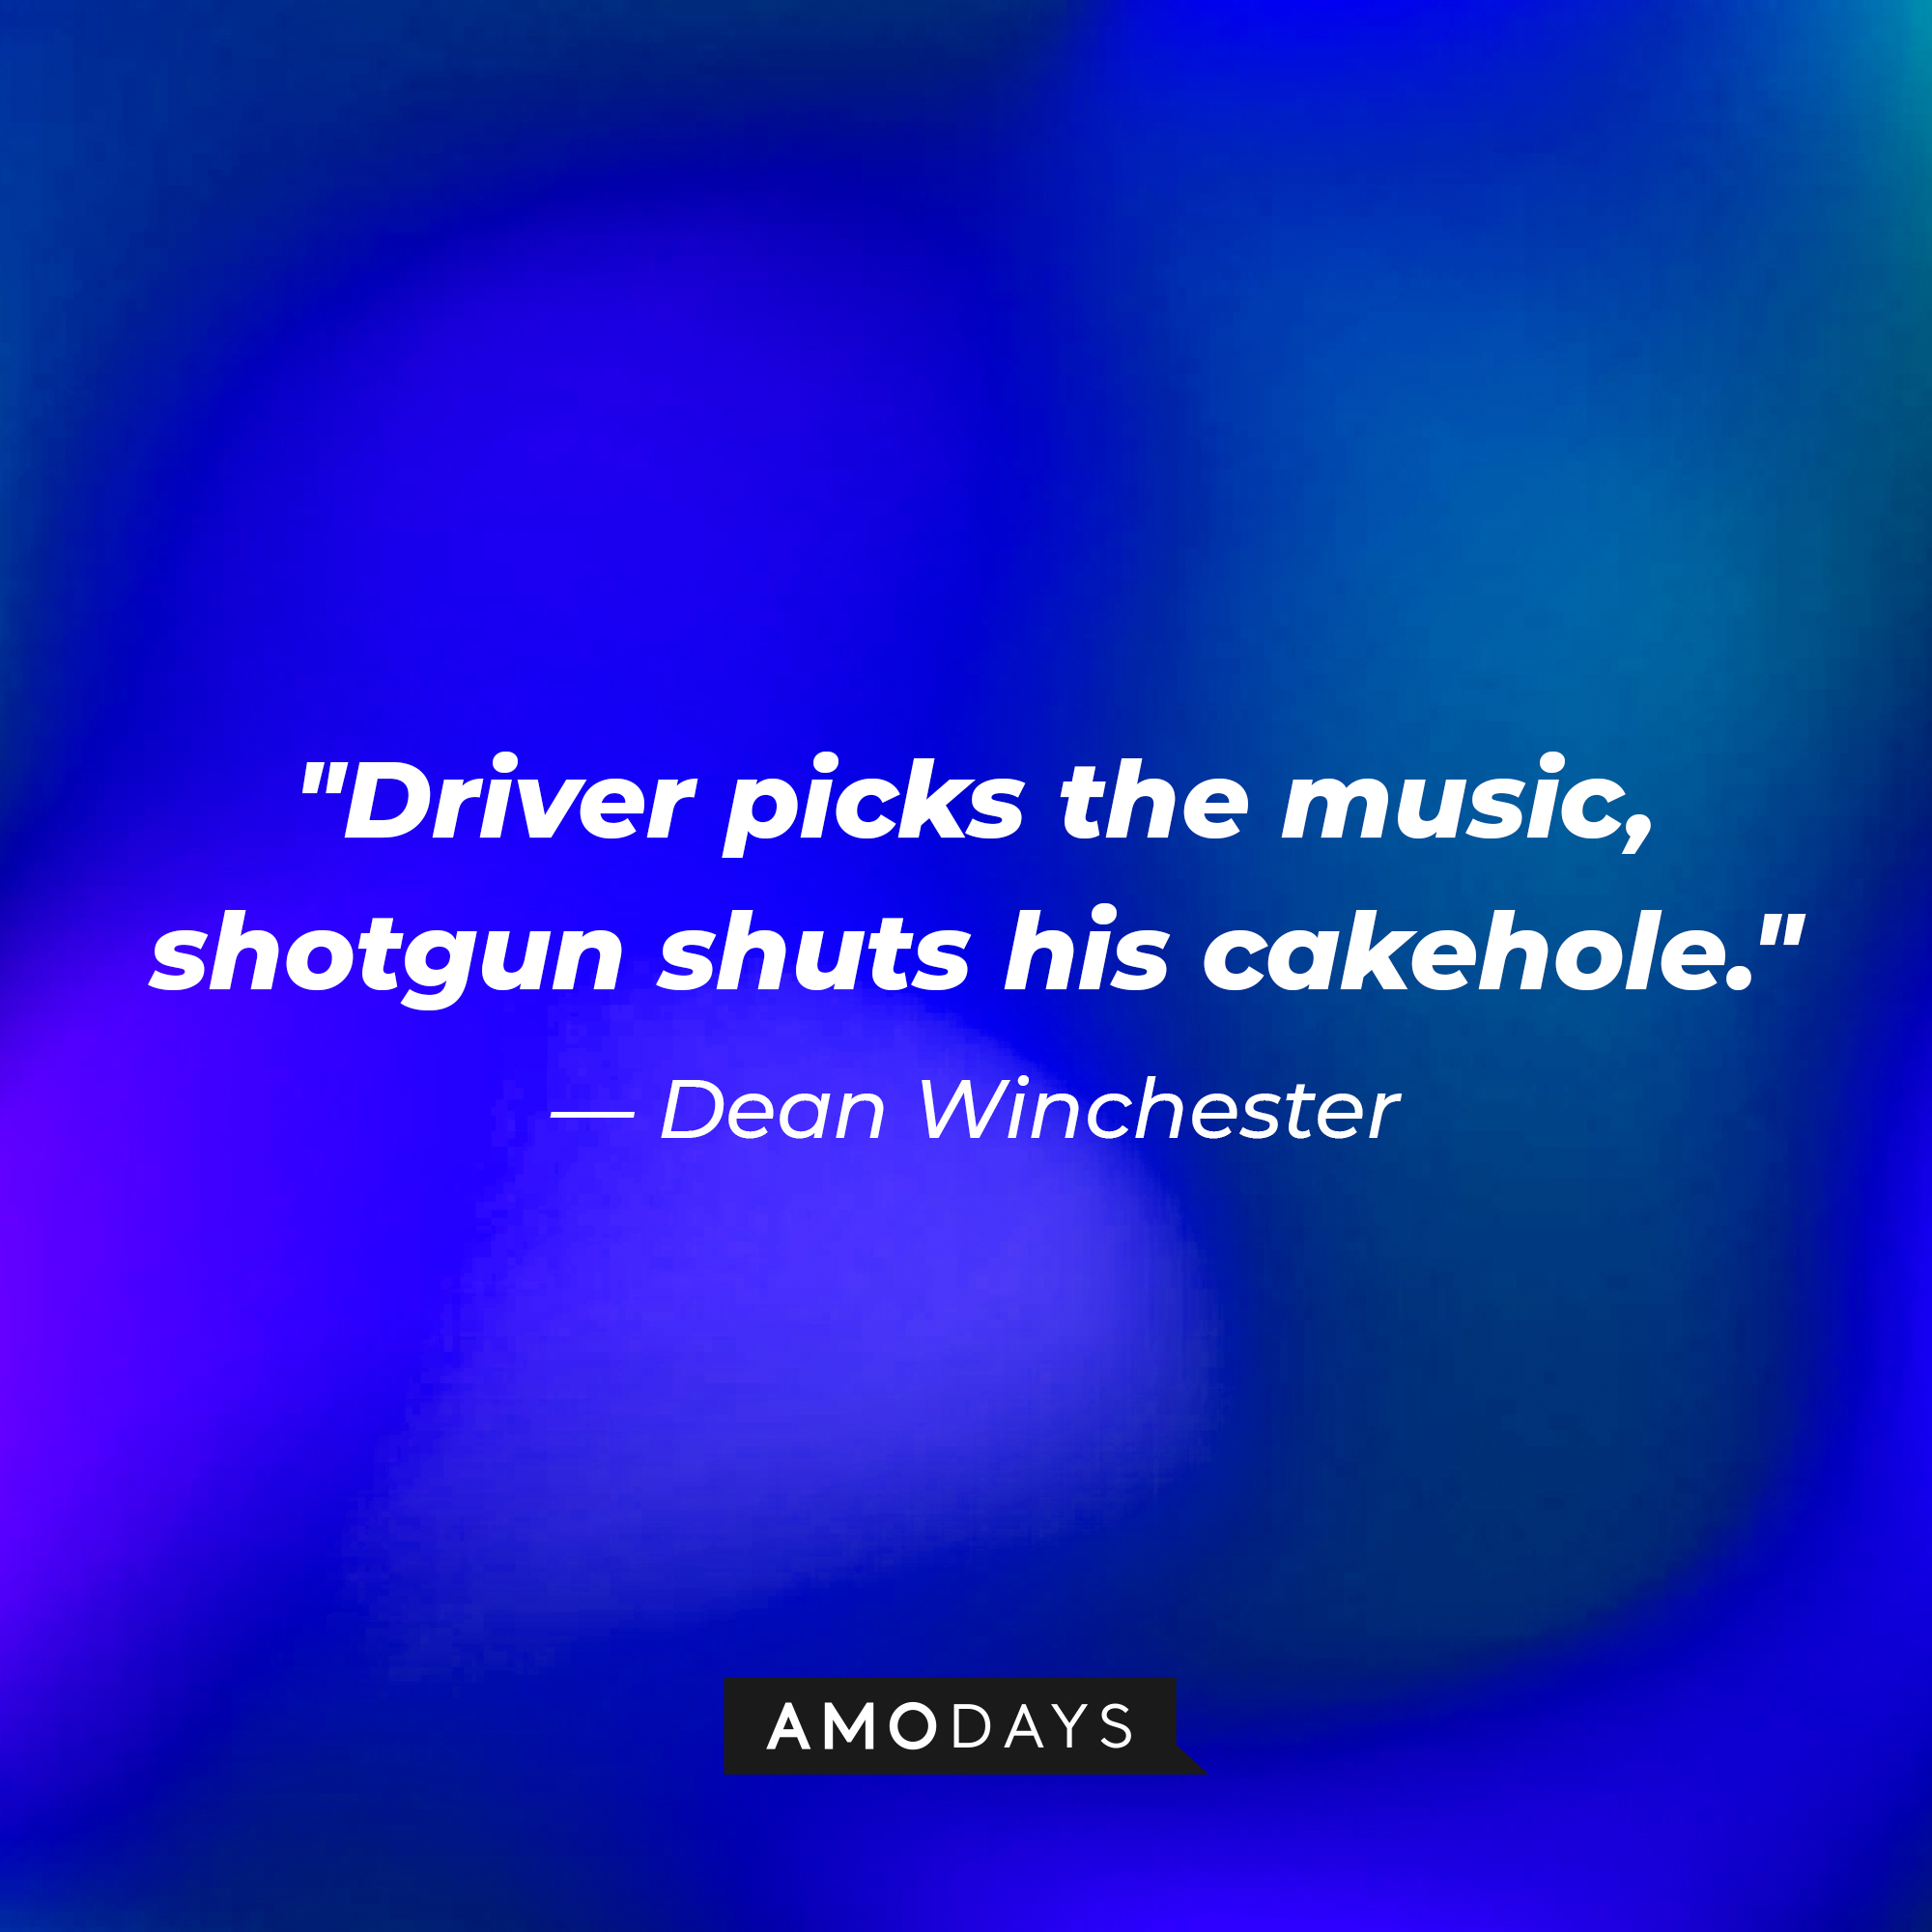 Dean Winchester's quote, "Driver picks the music, shotgun shuts his cakehole." | Source: Amodays